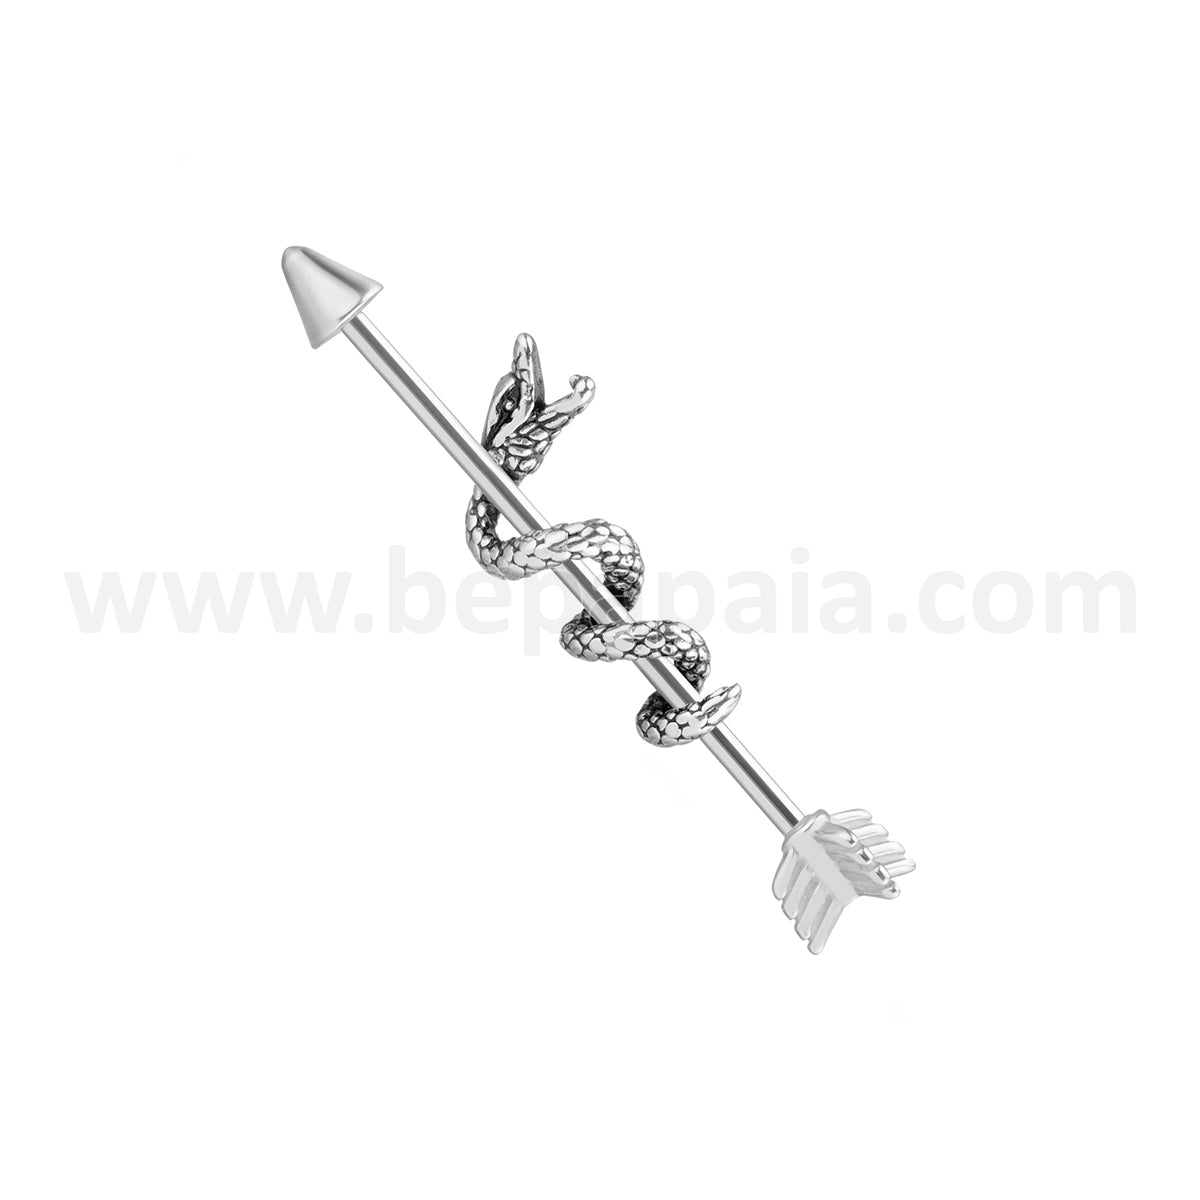 Industrial piercing with snake and arrow